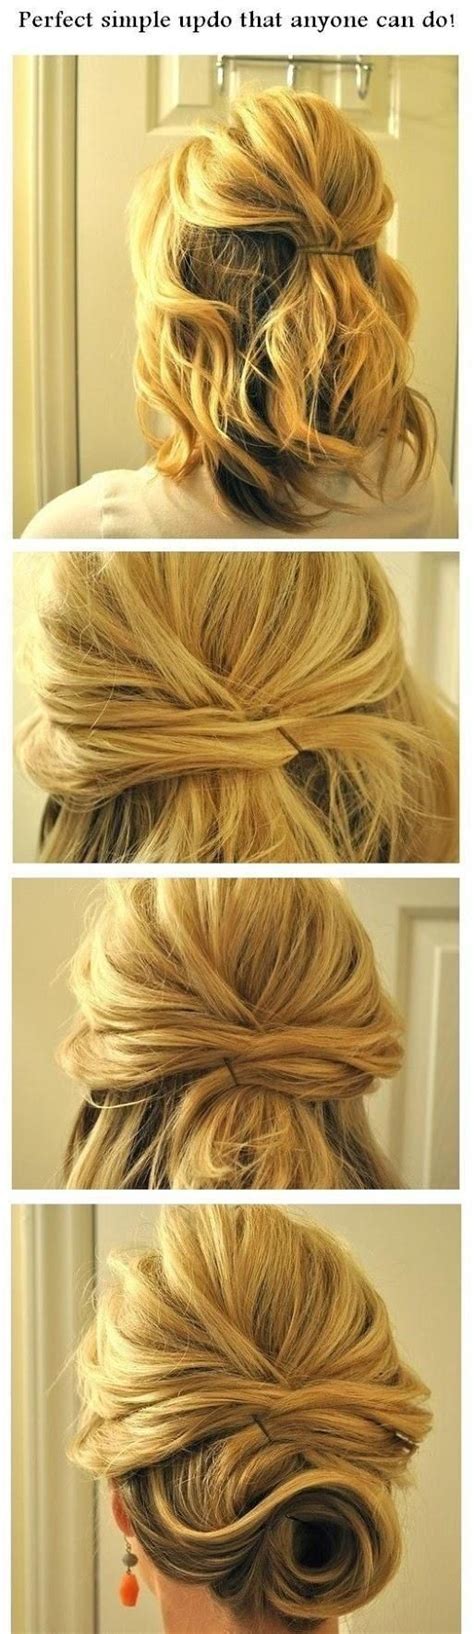 Just add in some curls and hide your hair tie by wrapping the hair around your hair tie and. 12 Trendy Low Bun Updo Hairstyles Tutorials: Easy Cute - PoPular Haircuts